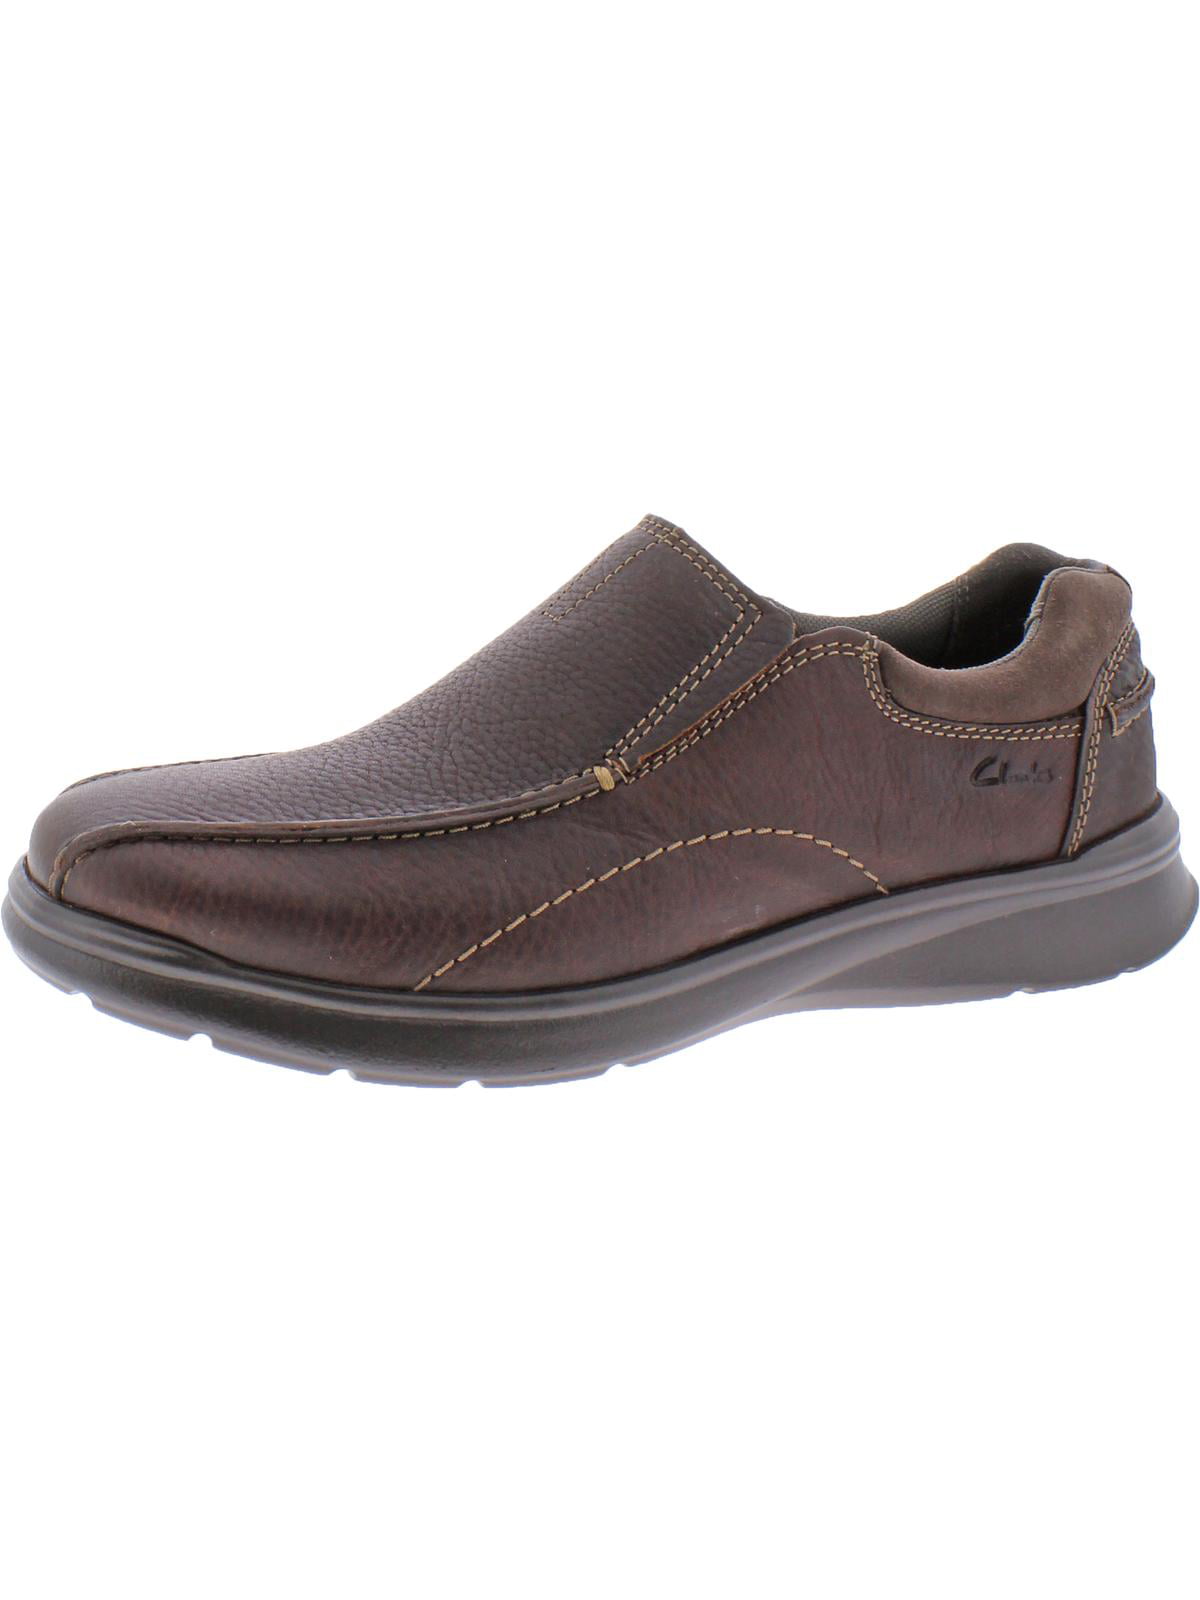 Clarks - Clarks Mens Cotrell Step Leather Pebbled Loafers - Walmart.com ...